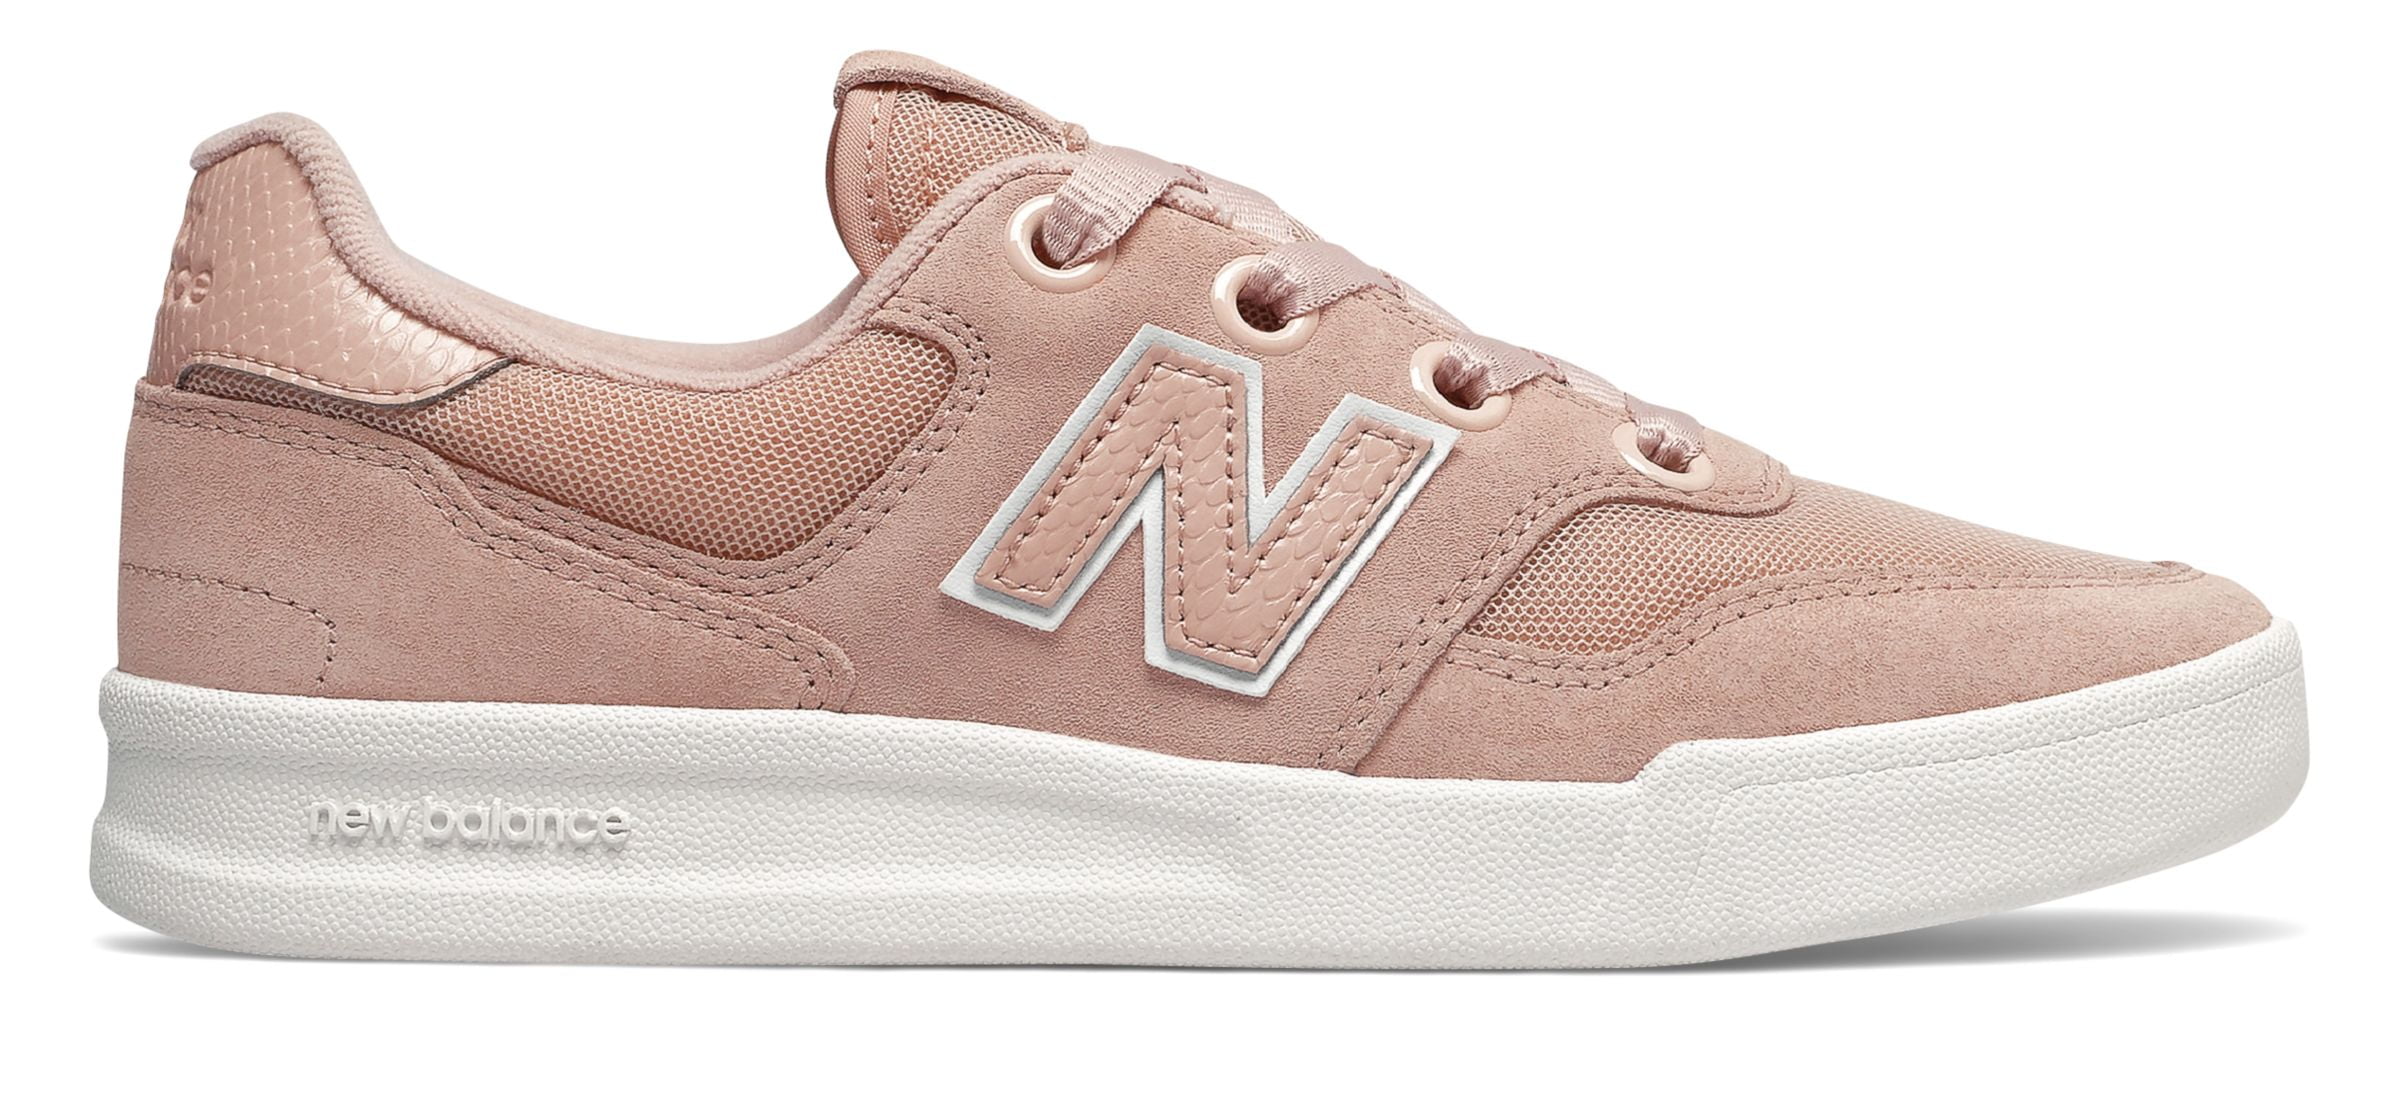 New Balance Women's 300 Shoes Pink with 